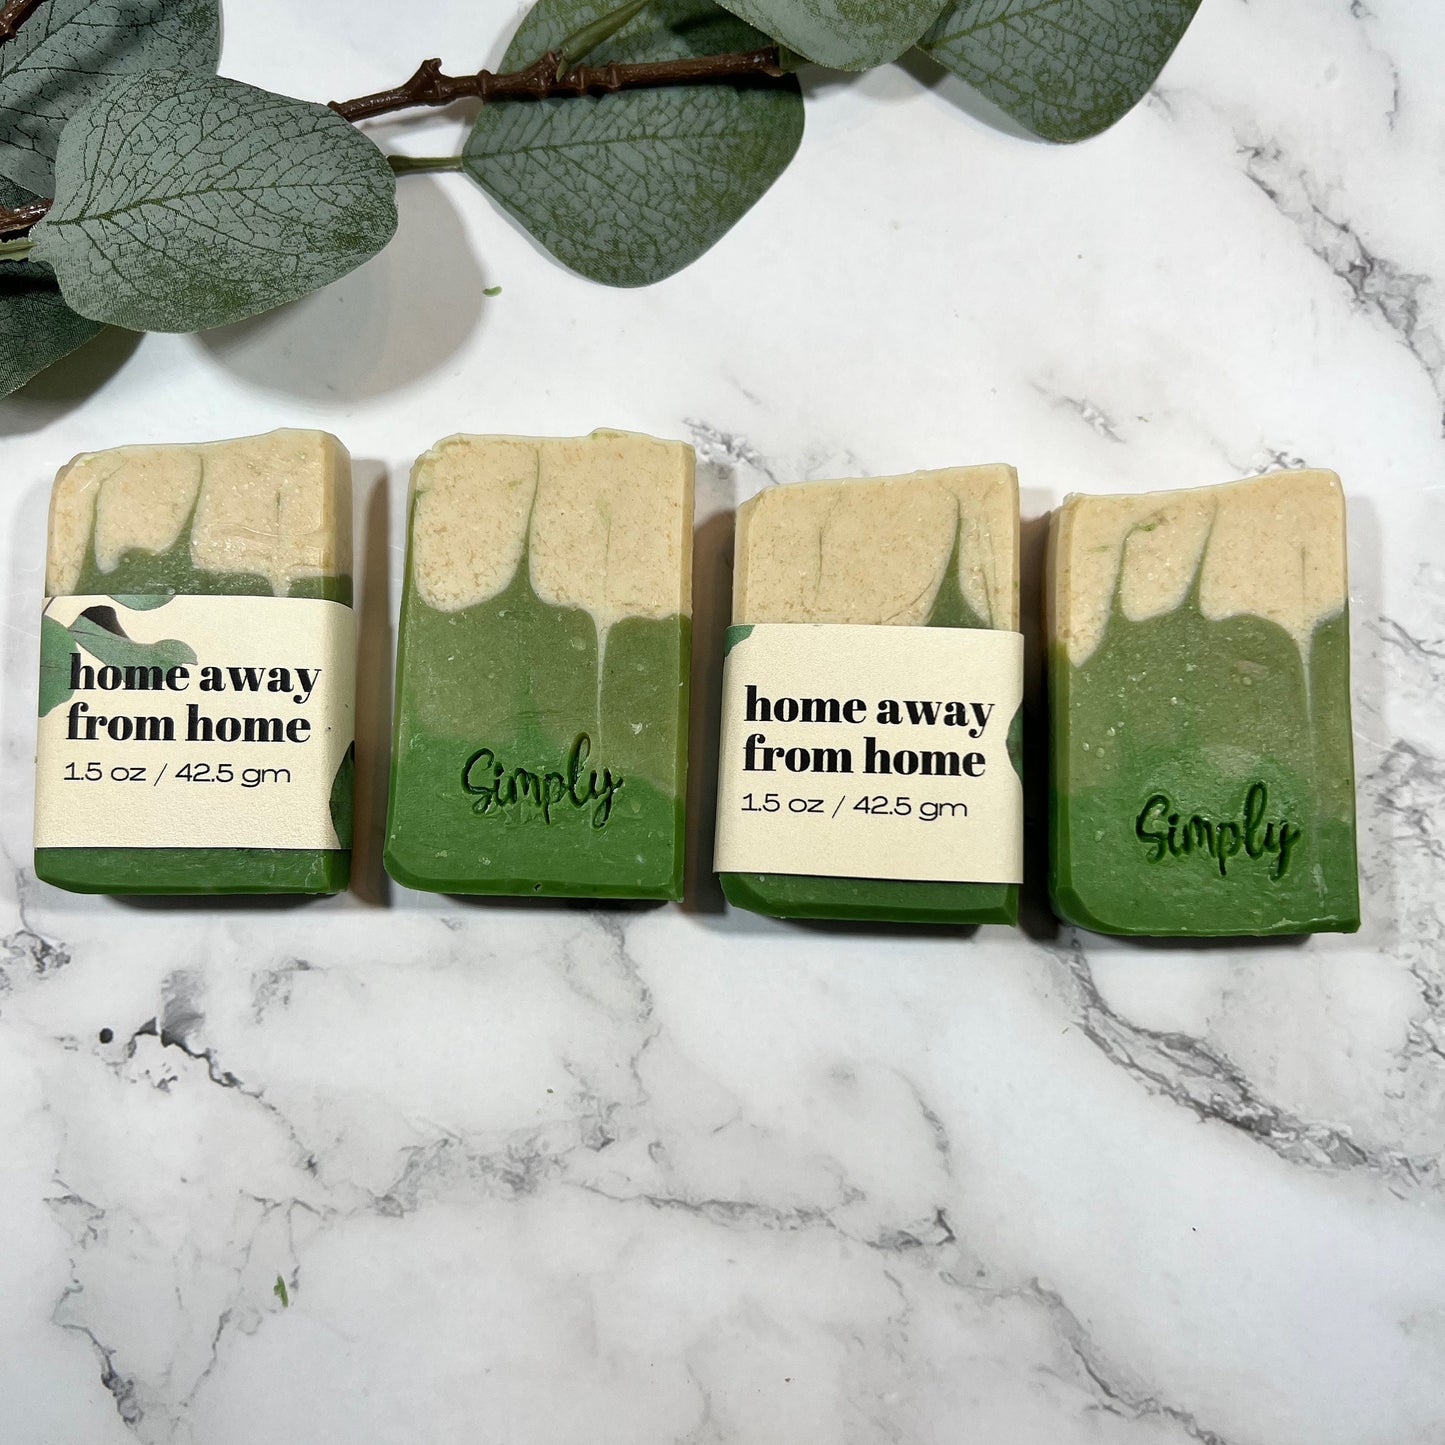 Luxurious Eucalyptus Rosemary Cold Process Soap - Ideal for Travel and Guest Rooms!